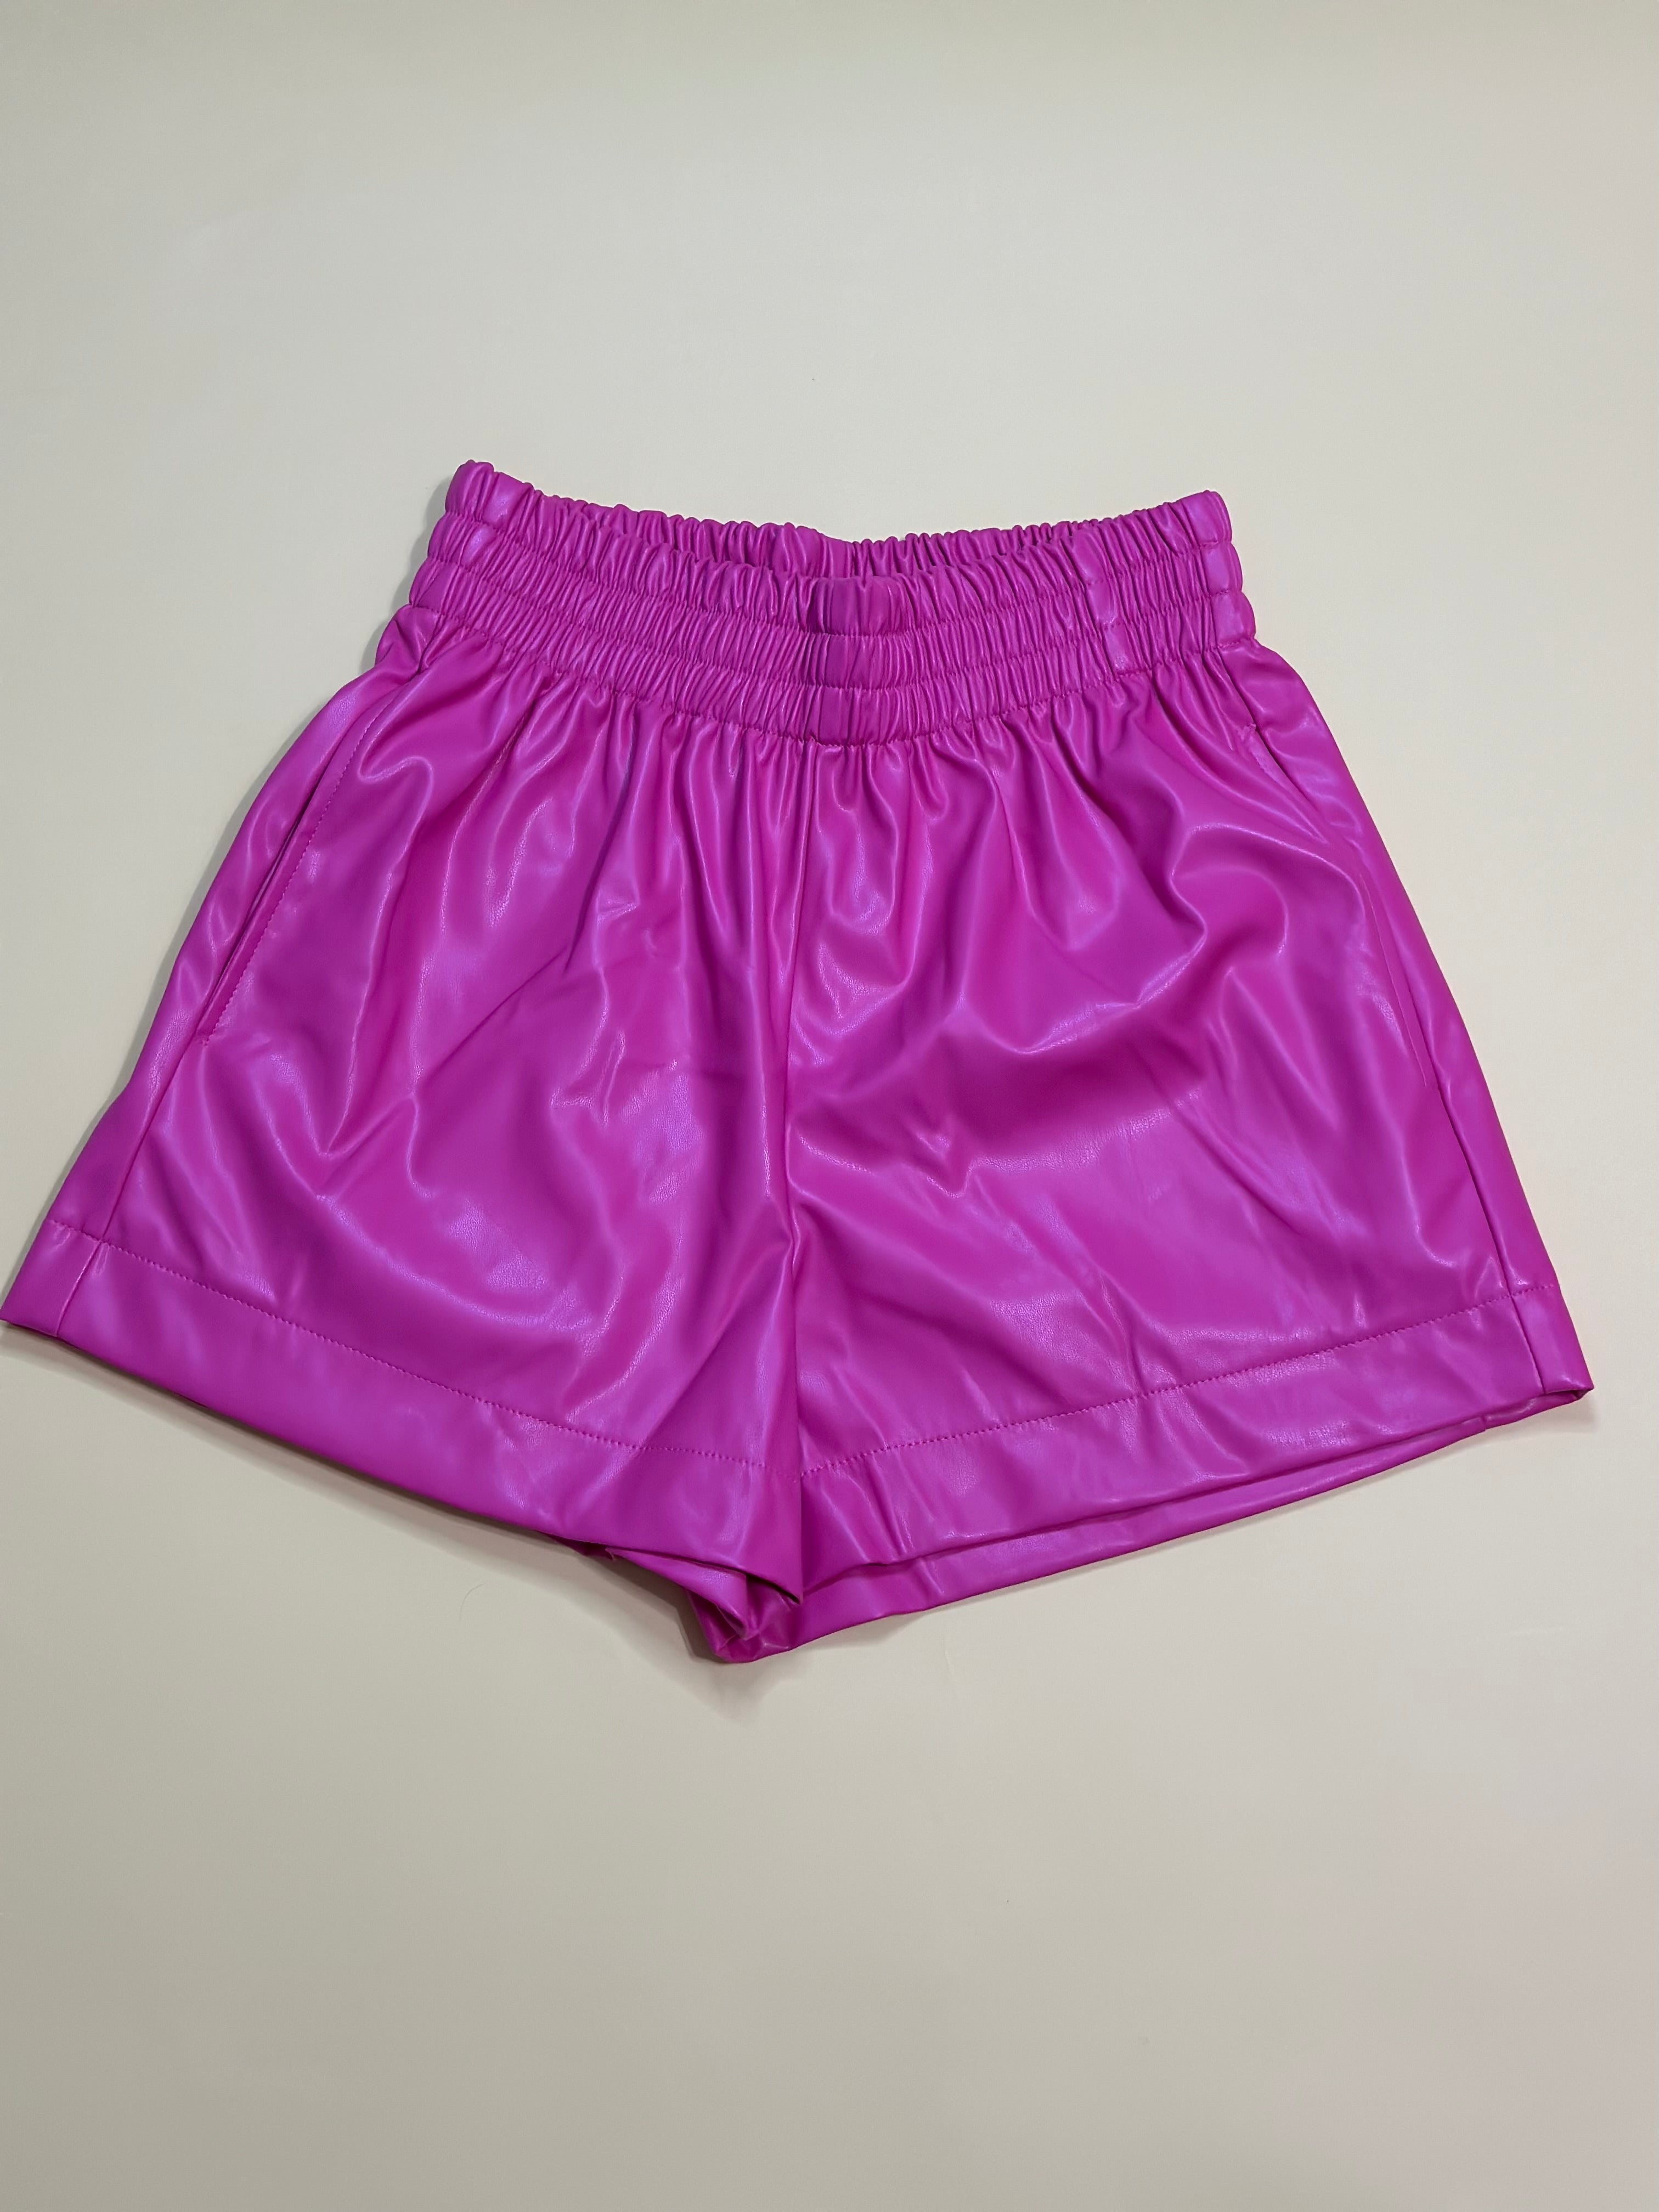 HOT PINK LEATHER SHORTS BY BRITT AND BELLE BOUTIQUE